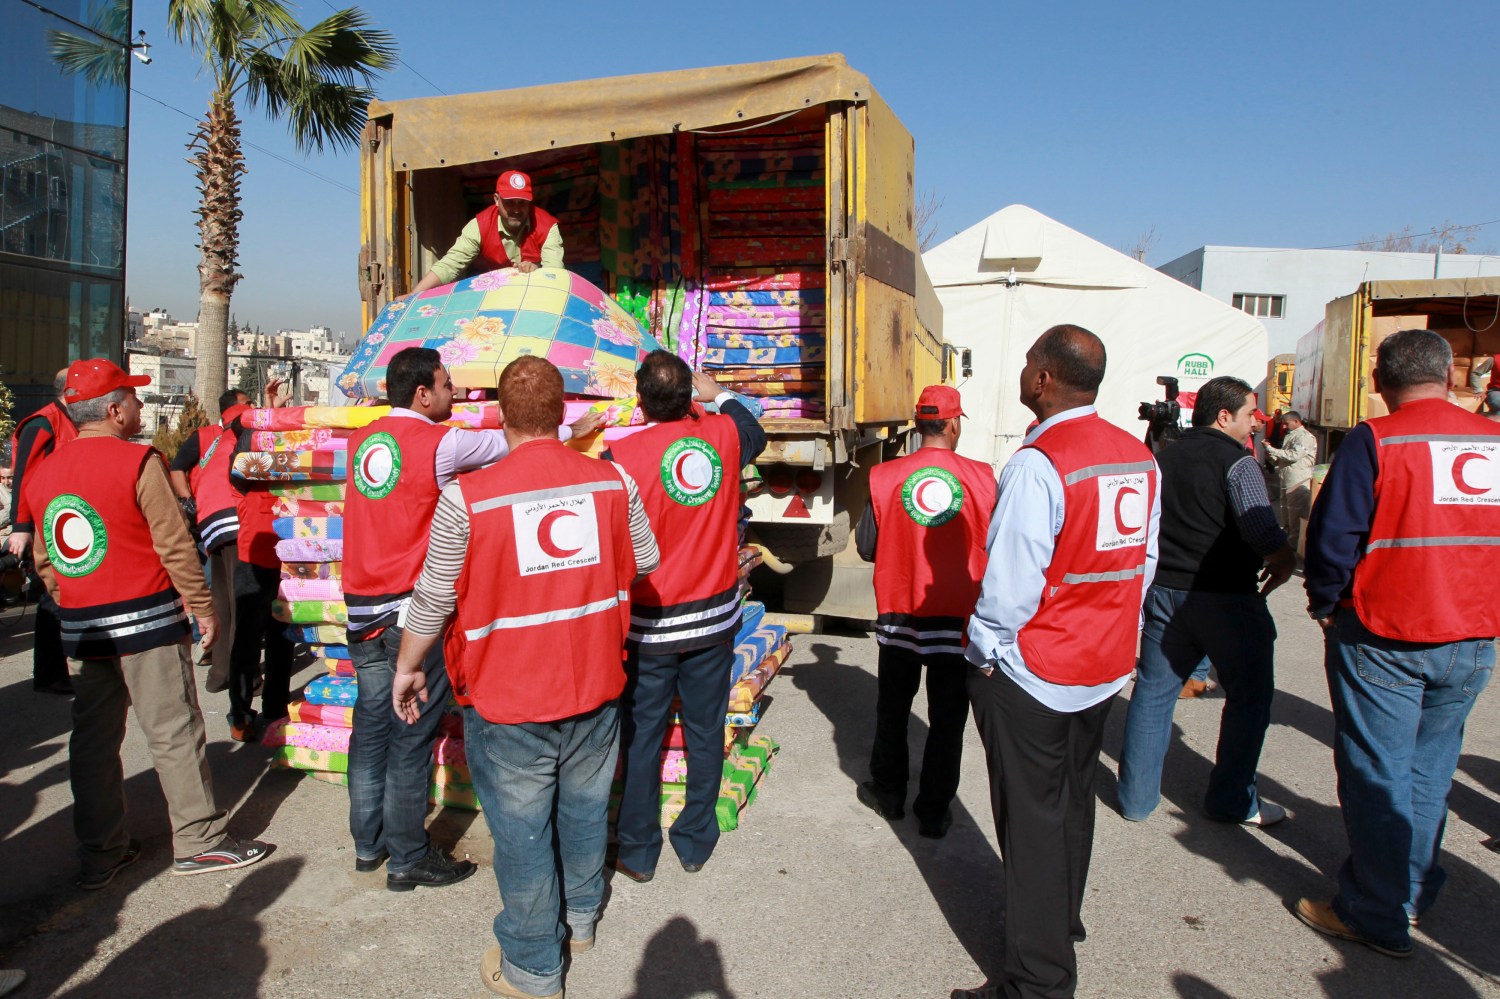 Iraqi and Jordanian Red Crescent workers load blankets and mattresses onto a truck, to deliver to Syrian refugees, in Amman February 10, 2013. About 3,000 Syrian refugee families living in Jordan received humanitarian aid from the Iraqi Red Crescent organization, in coordination with the Jordanian Red Crescent, the organisation said. REUTERS/Muhammad Hamed (JORDAN - Tags: POLITICS SOCIETY IMMIGRATION) - RTR3DKK1